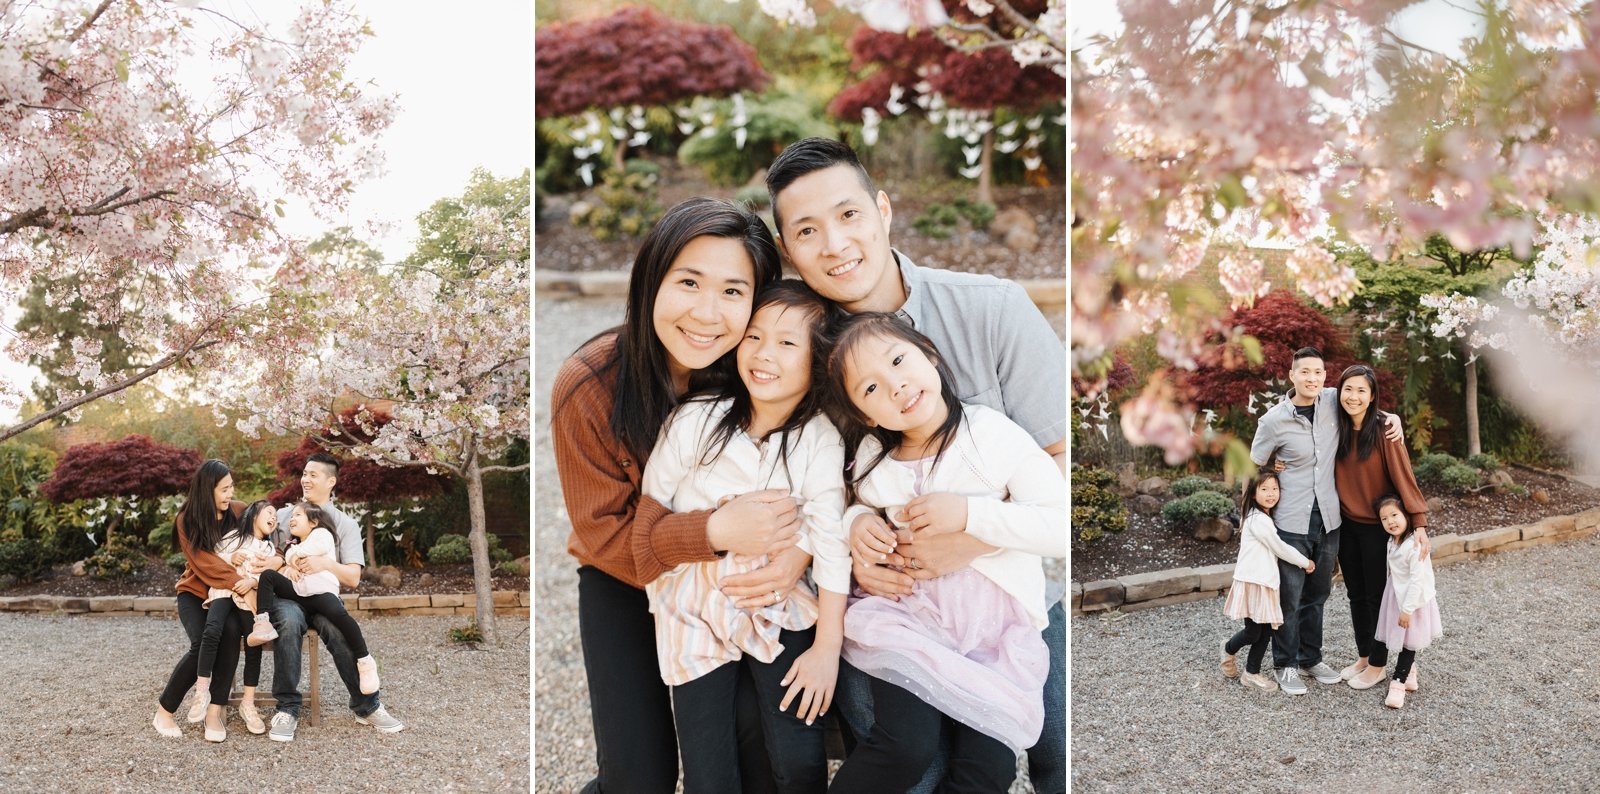 bay area cherry blossom photoshoot family photographer young soul photography  26.jpg